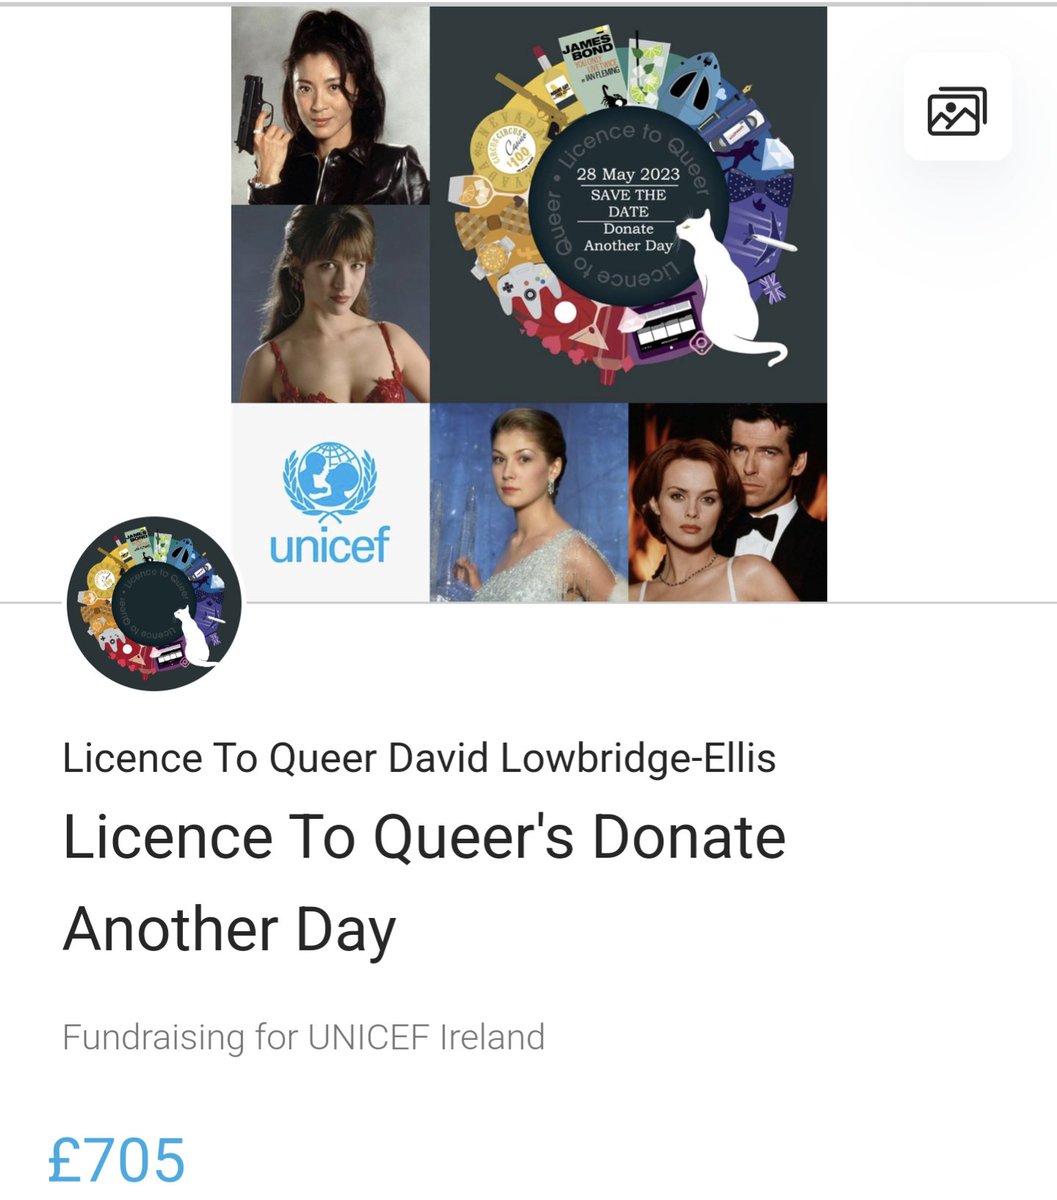 Goldeneye is about half way through and we've raised more than £700 so far today. That'll fund emergency water and hygiene kits for 18 families in Turkey or Syria. Anything you can give for @LicenceToQueer x @Unicef and #DonateAnotherDay will save lives. 

tinyurl.com/LtQDAD